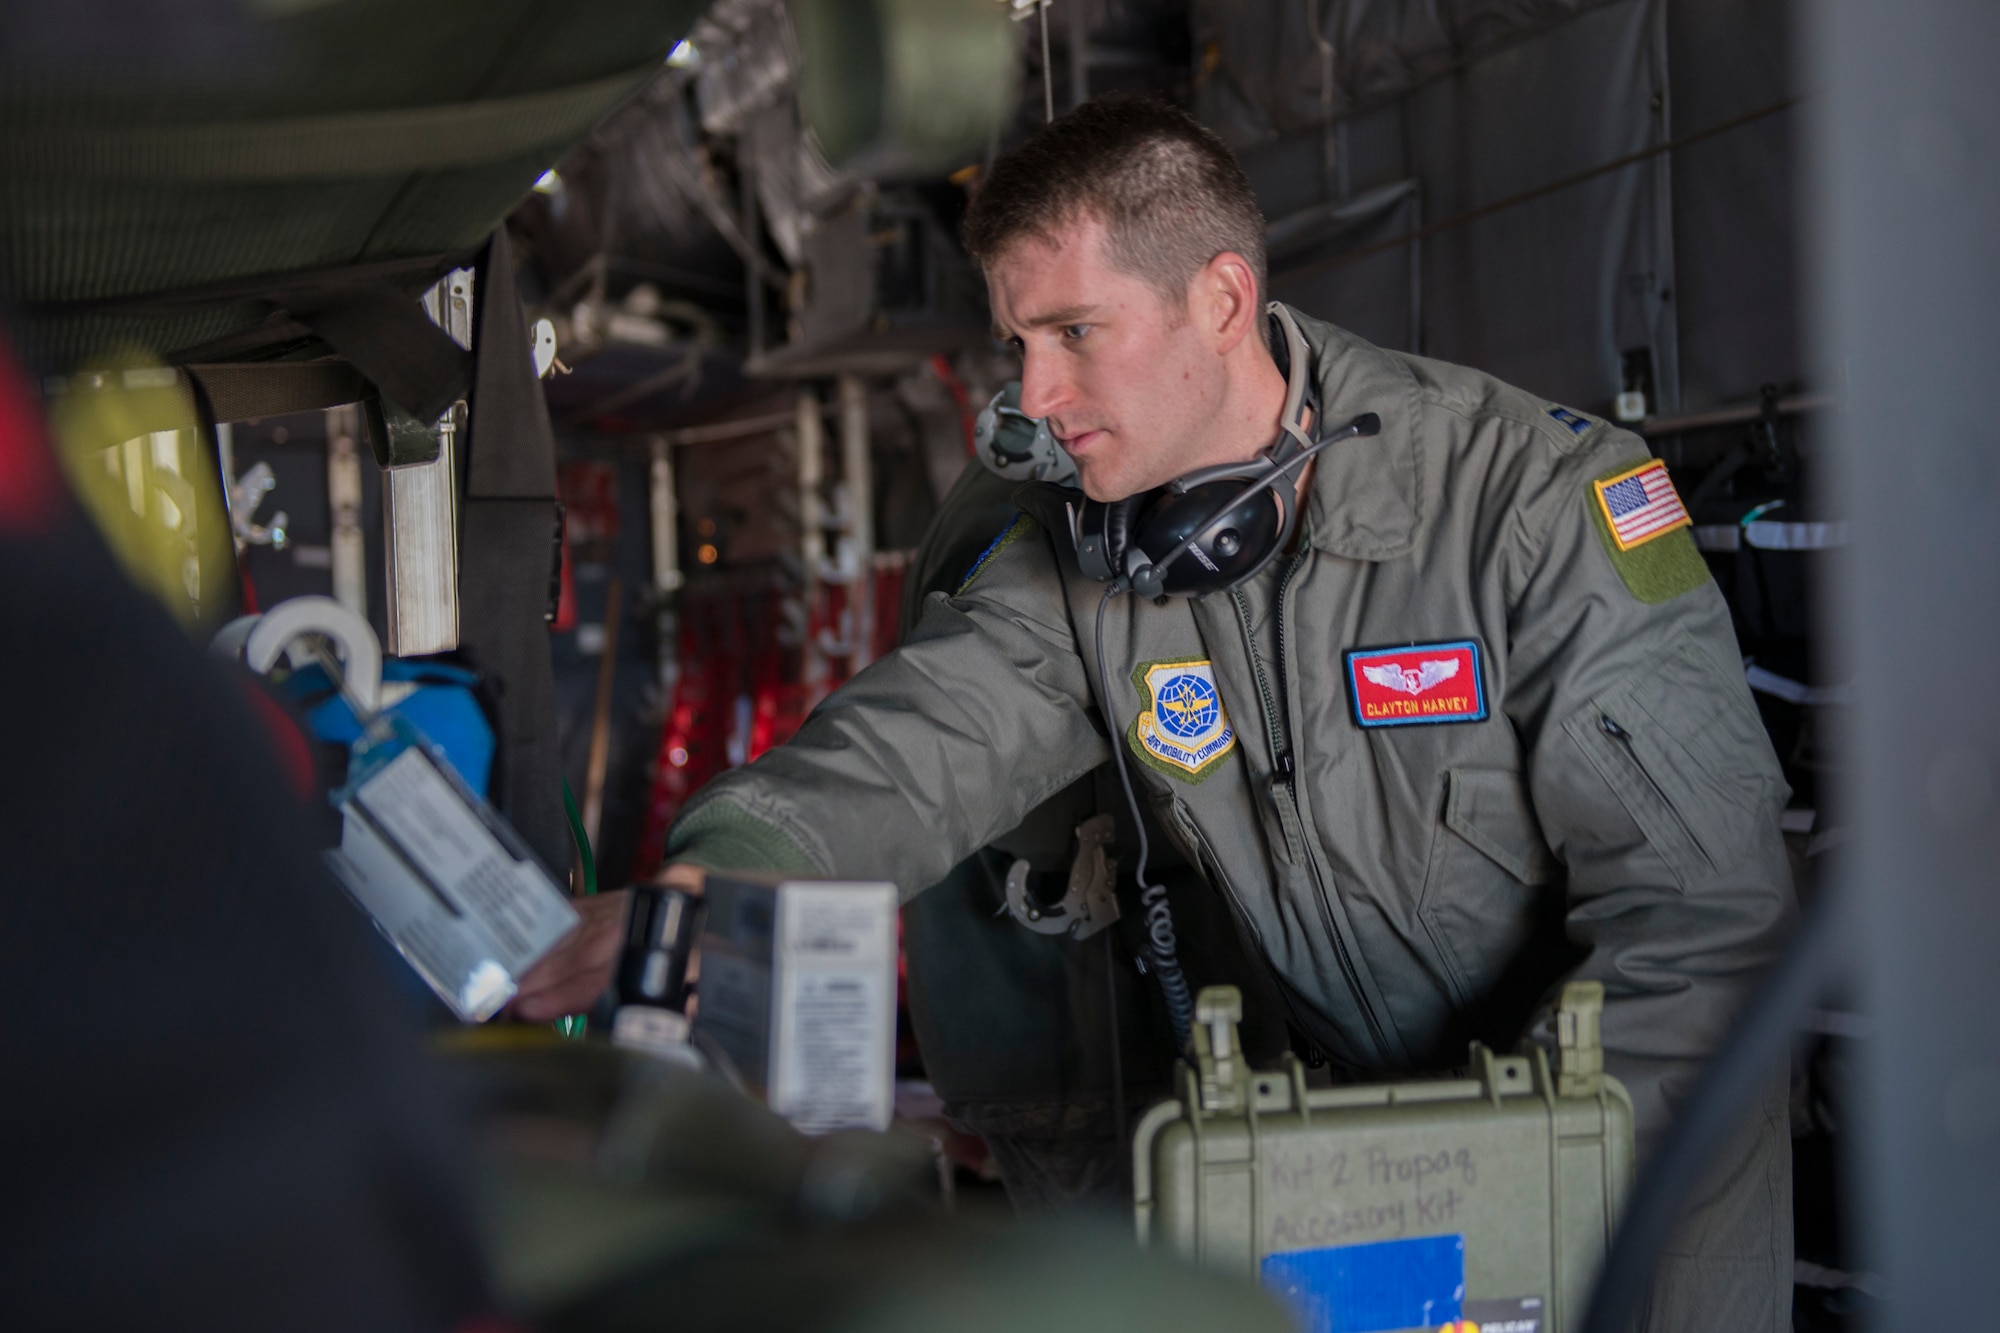 Capt. Clayton Harvey, 375th Aeromedical Evacuation Squadron flight nurse, verifies that all   medical equipment is functioning properly during training in a simulated C-130 Hercules fuselage Jan. 28, 2016, Scott Air Force Base, Illinois. The fuselage provides the 375th AES an opportunity to accomplish 50 percent of their required semi-annual training. (U.S. Air Force photo by Airman 1st Class Melissa Estevez)